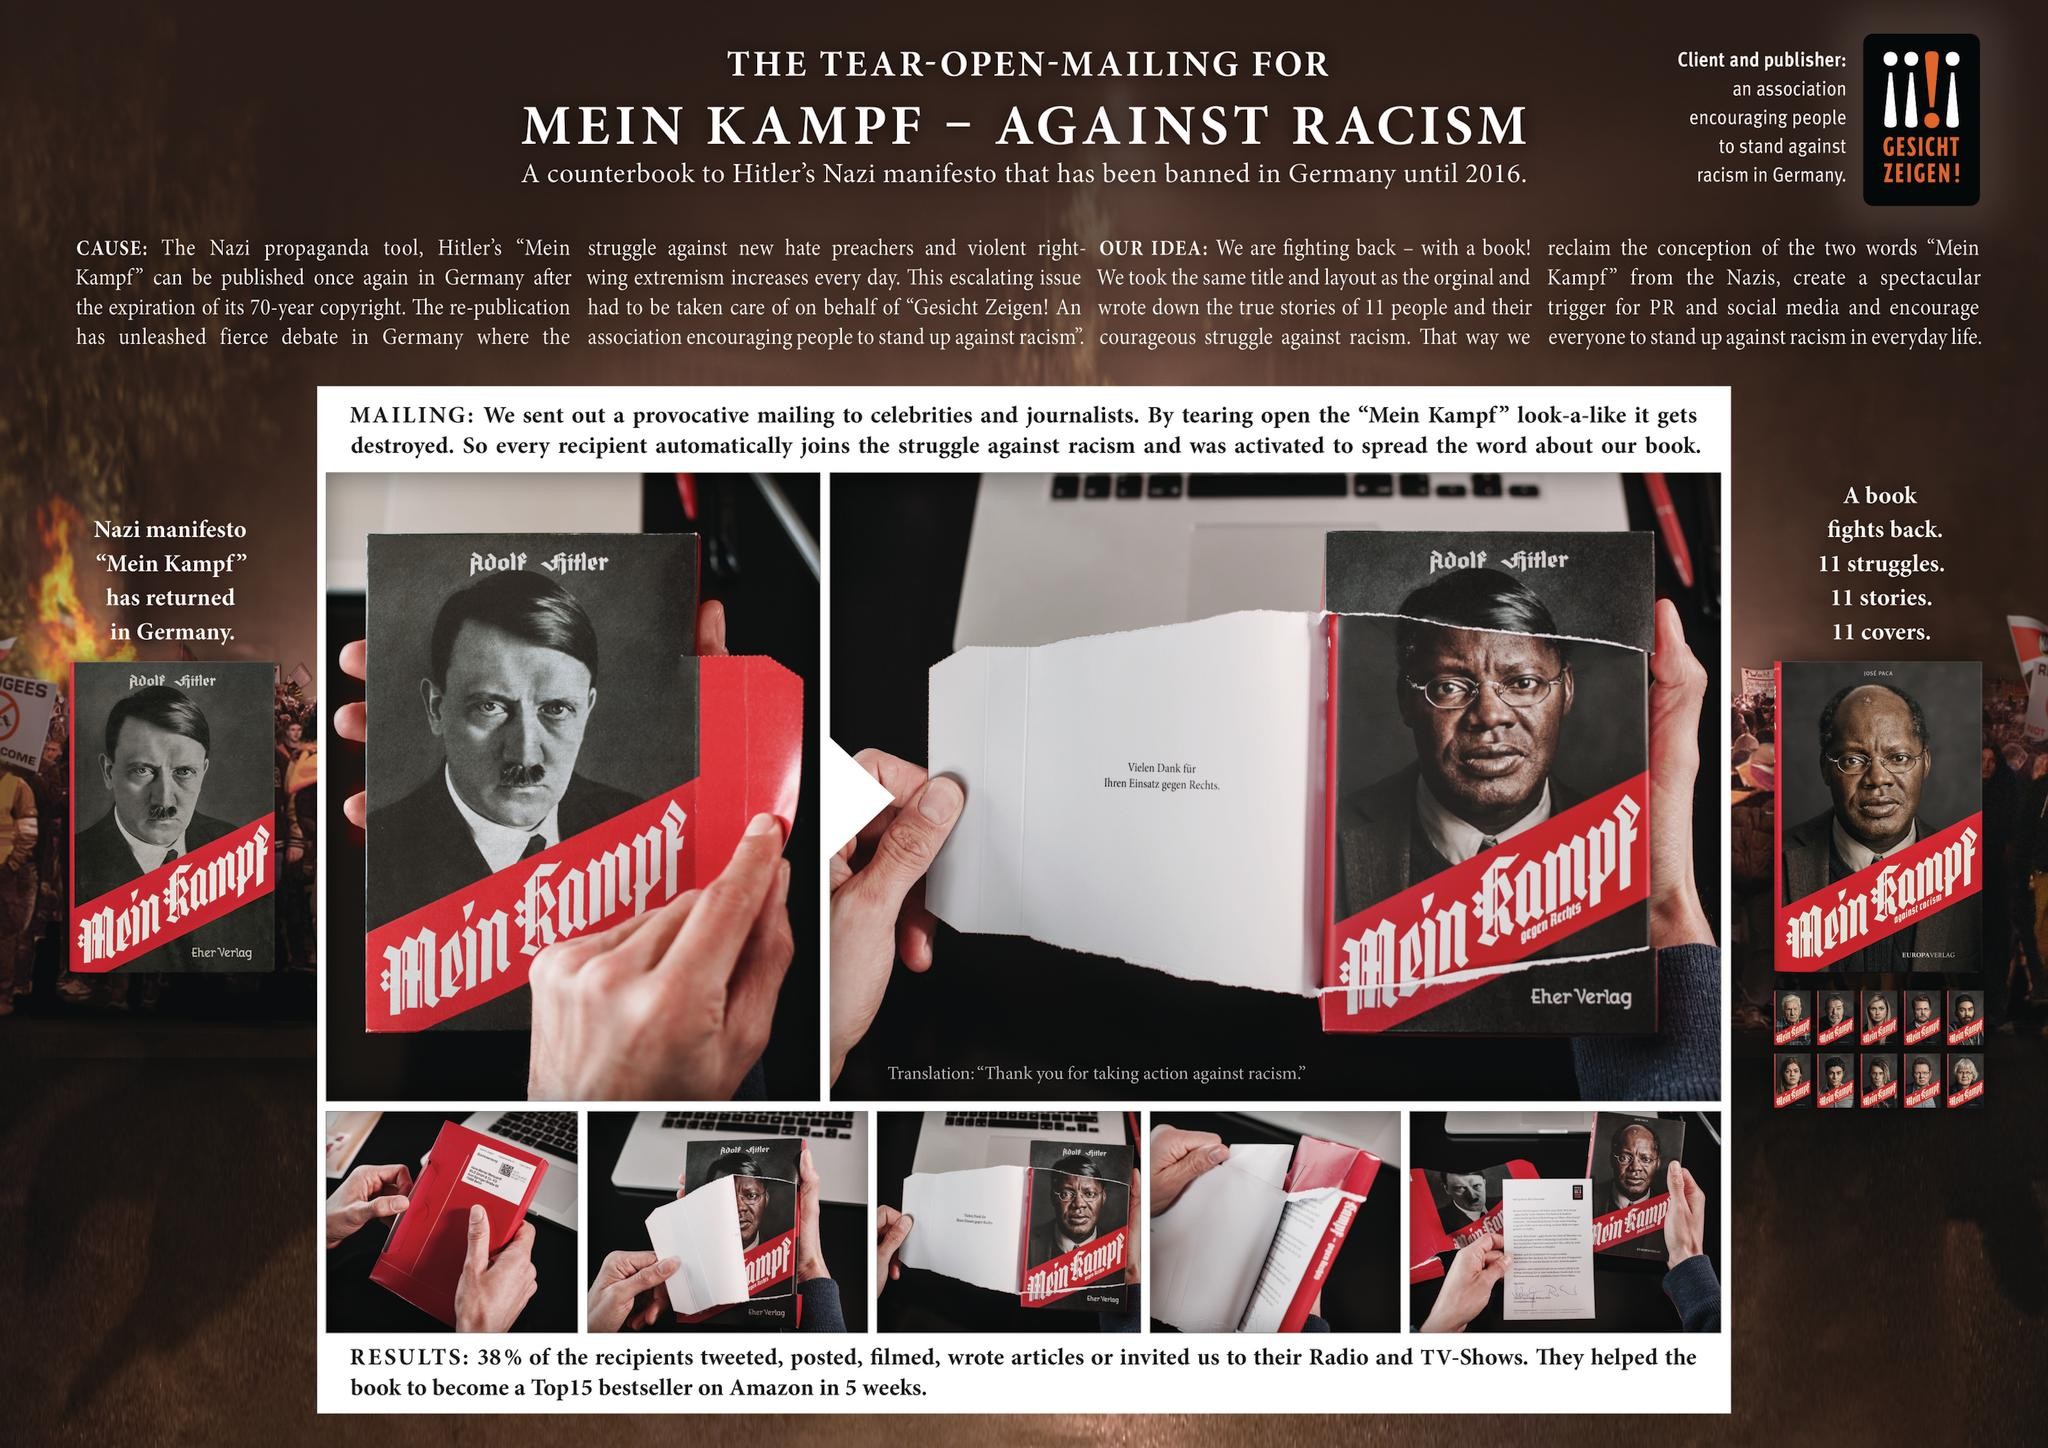 THE TEAR-OPEN-MAILING FOR "MEIN KAMPF - AGAINST RACISM"